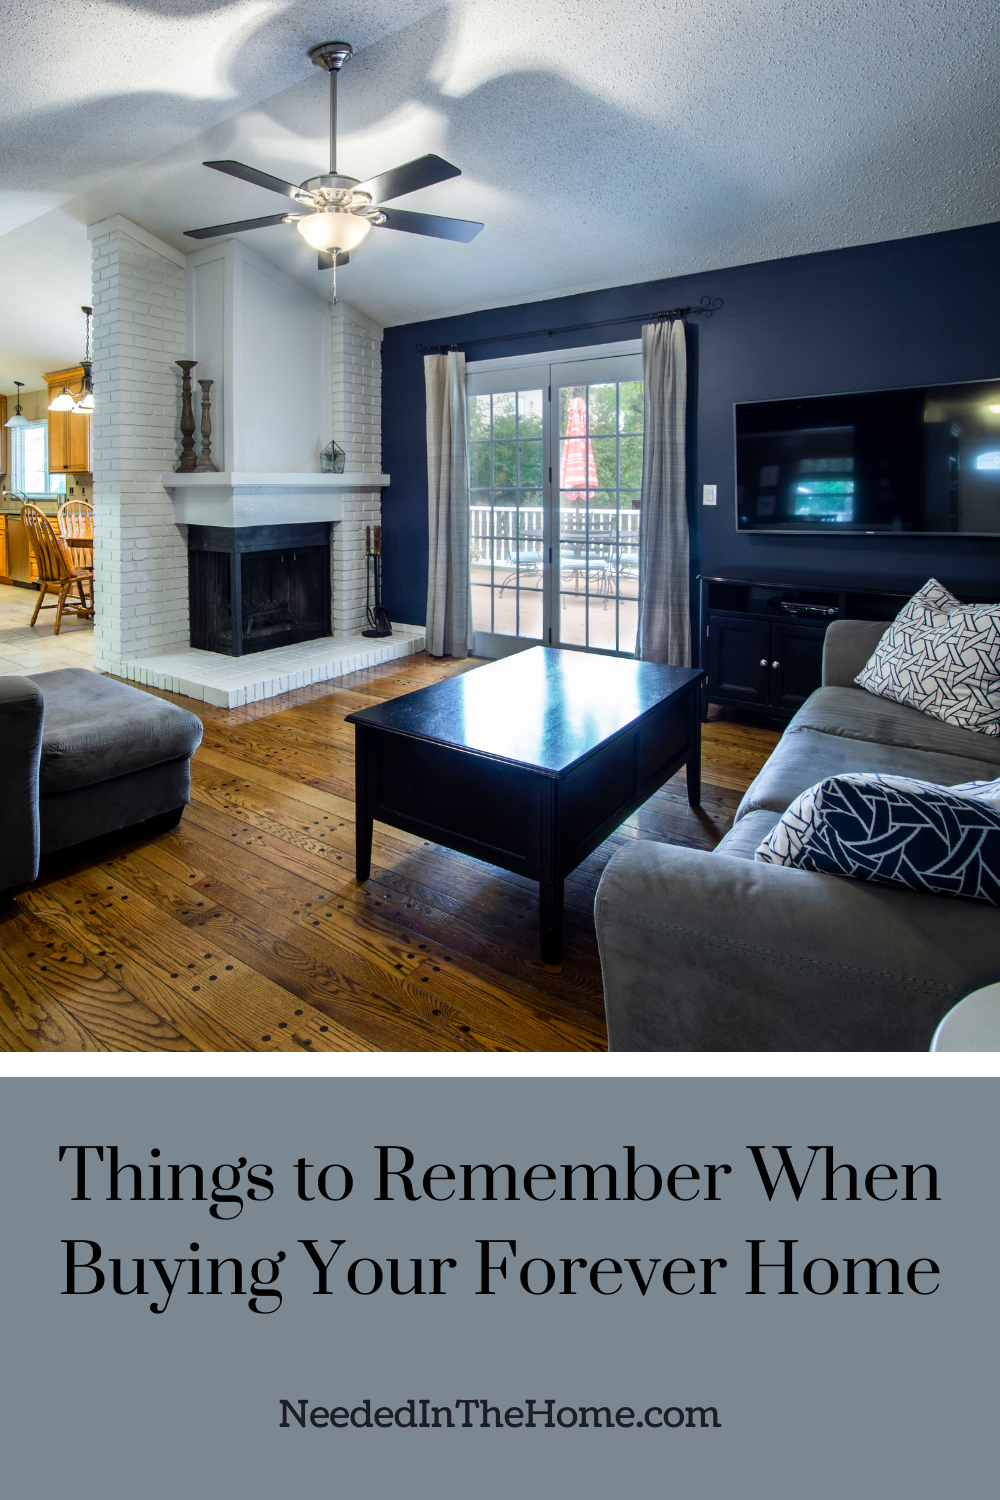 pinterest-pin-description things to remember when buying your forever home furnished living room with fireplace ceiling fan porch windows with deck neededinthehome